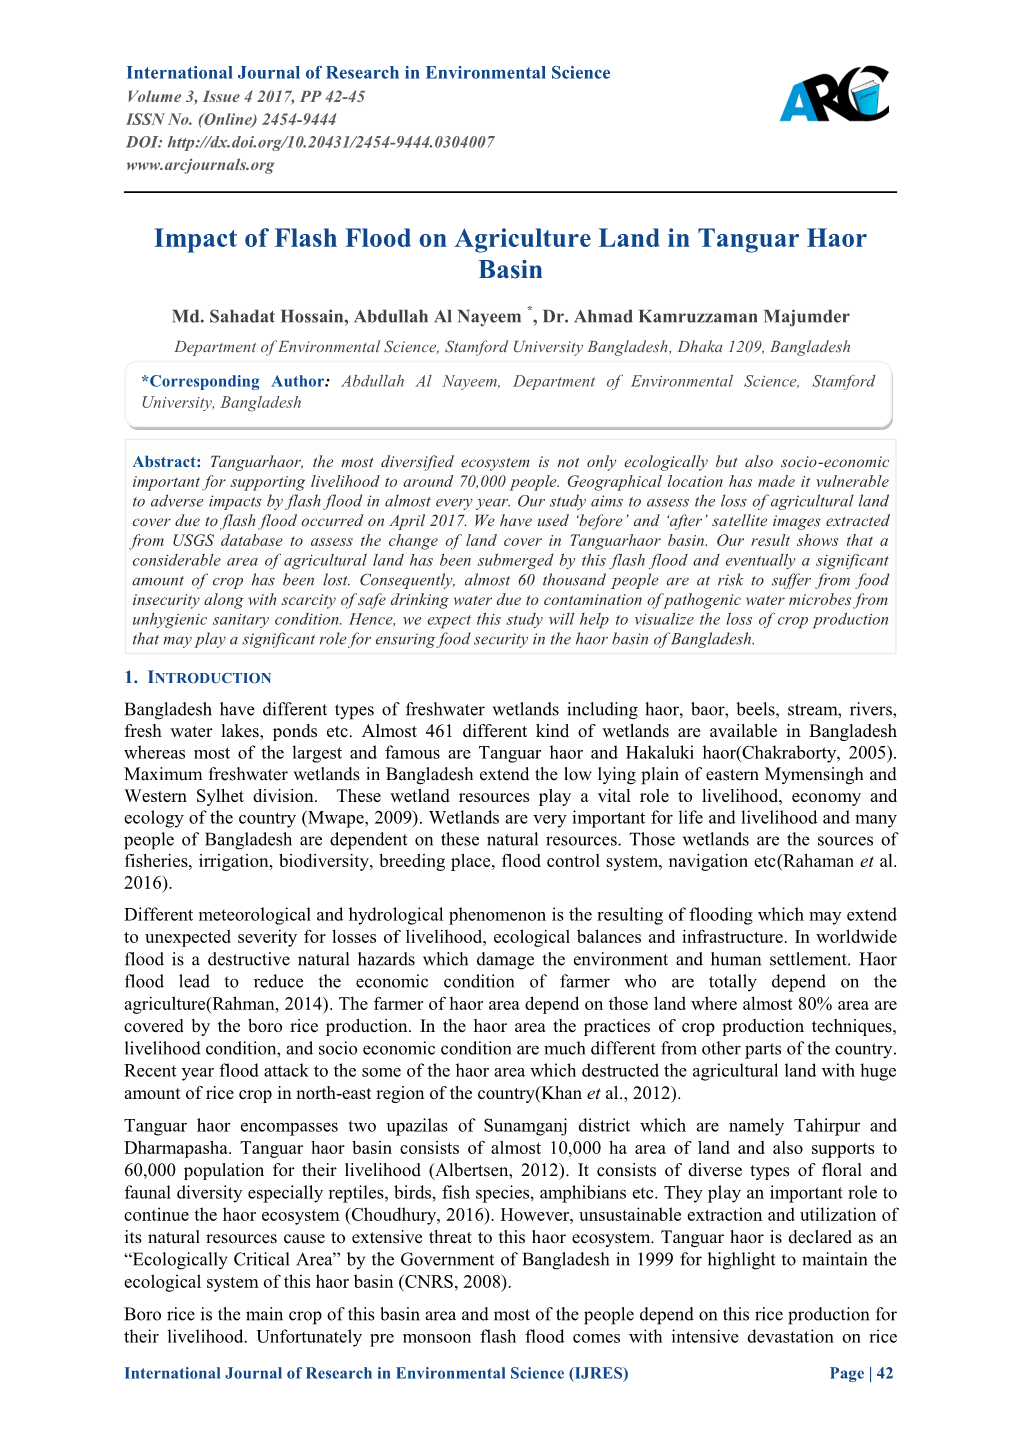 Impact of Flash Flood on Agriculture Land in Tanguar Haor Basin